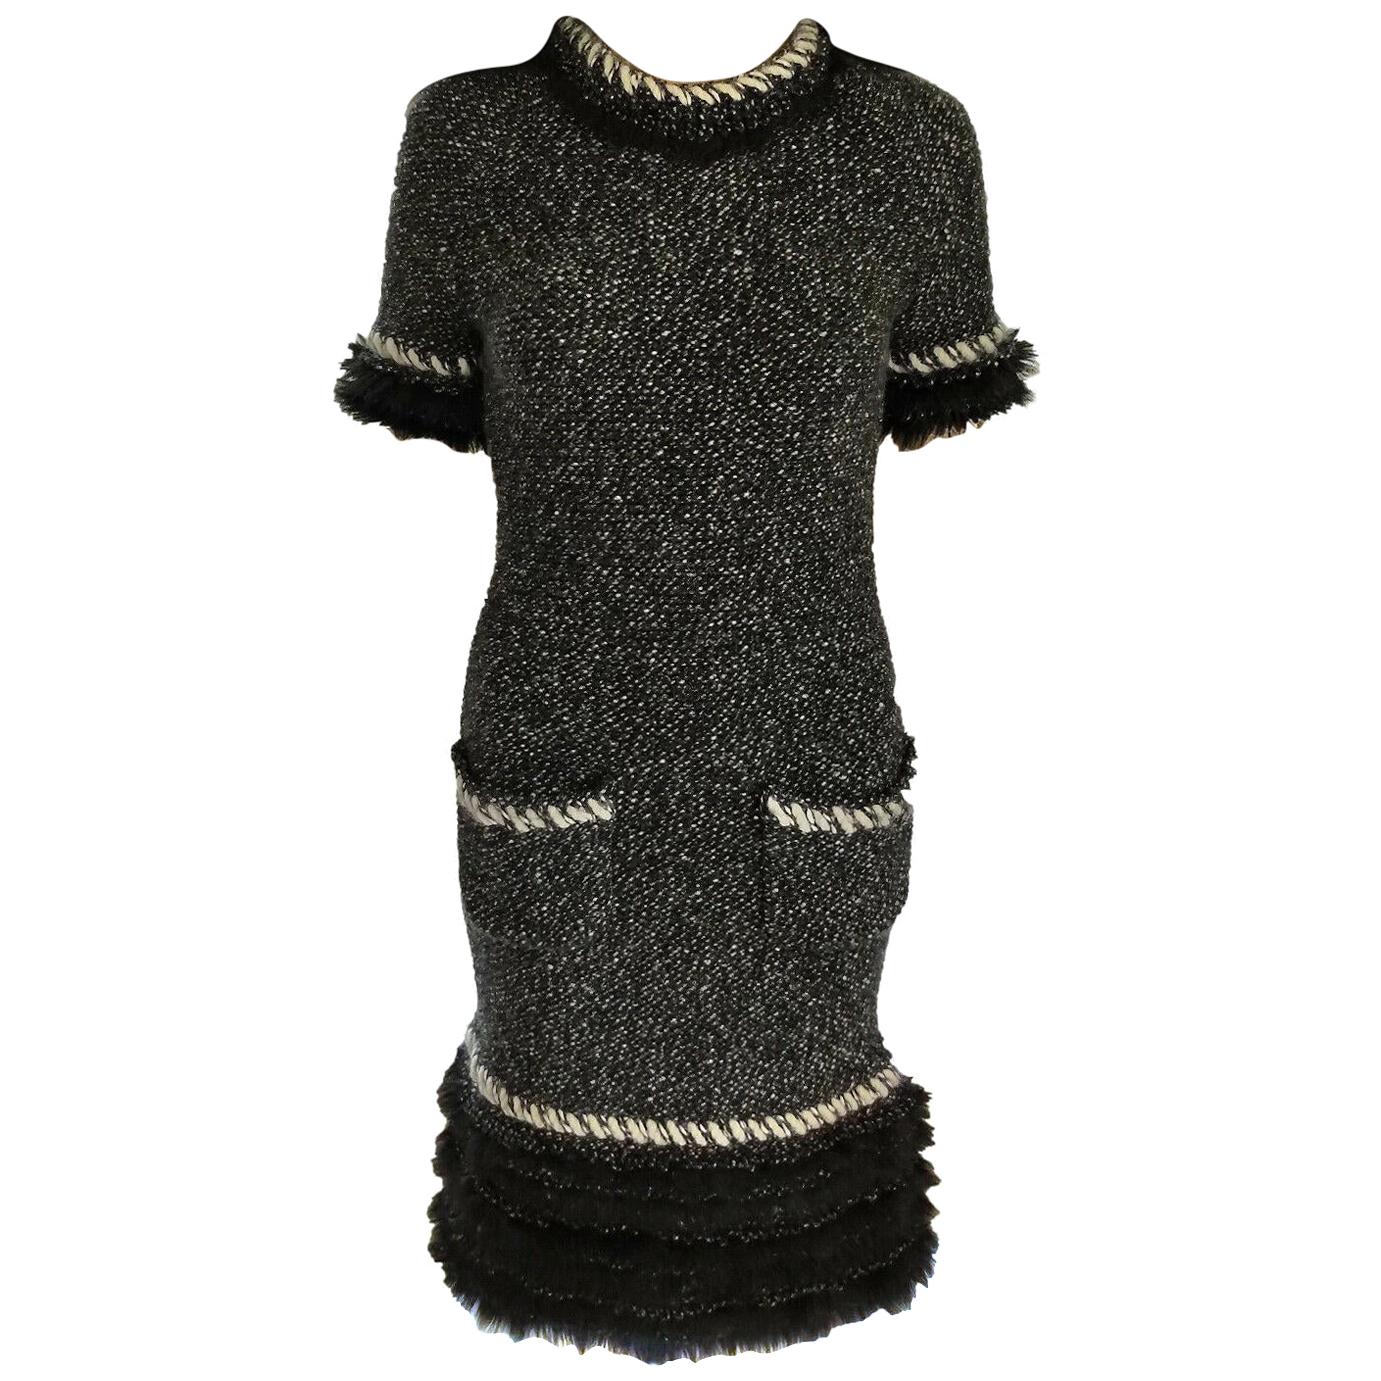 Chanel Fall 2010 Black and White Tweed Cashmere Fur Fringe Dress